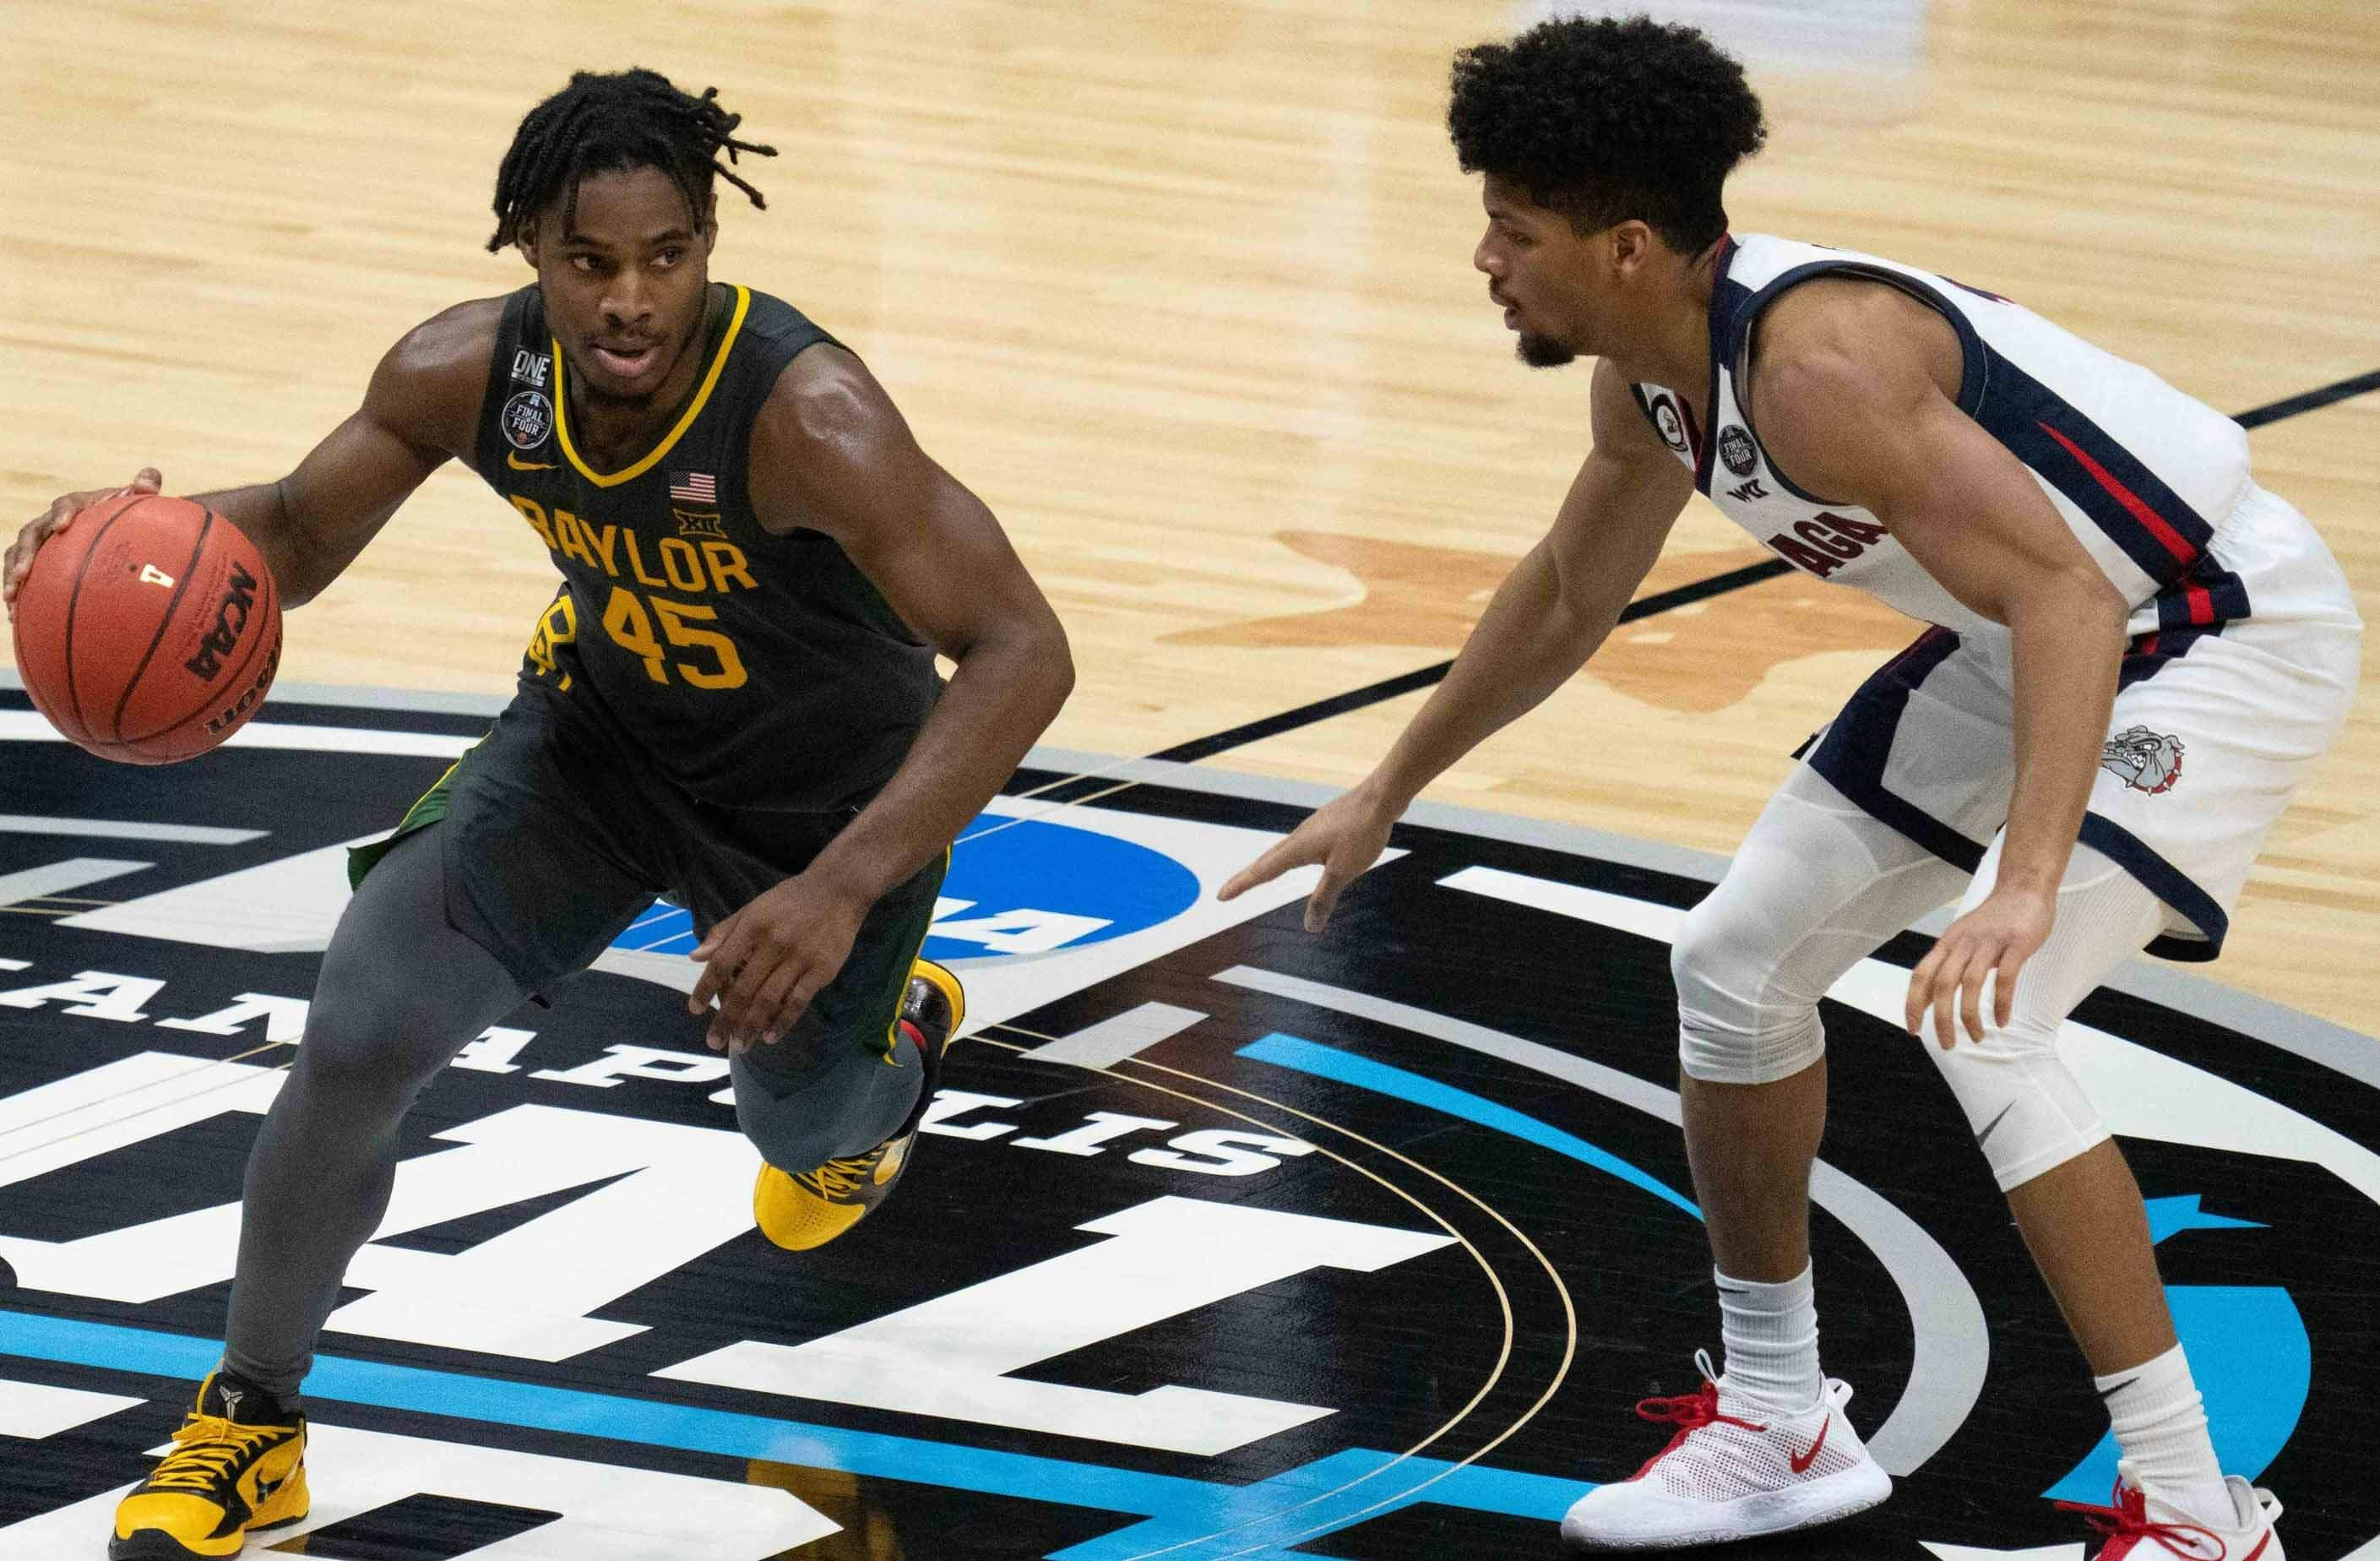 Baylor Bears guard Davion Mitchell (45) dribbles the basketball against Gonzaga Bulldogs guard Aaron Cook (4) in the second half during the national championship game in the Final Four of the 2021 NCAA Tournament at Lucas Oil Stadium.